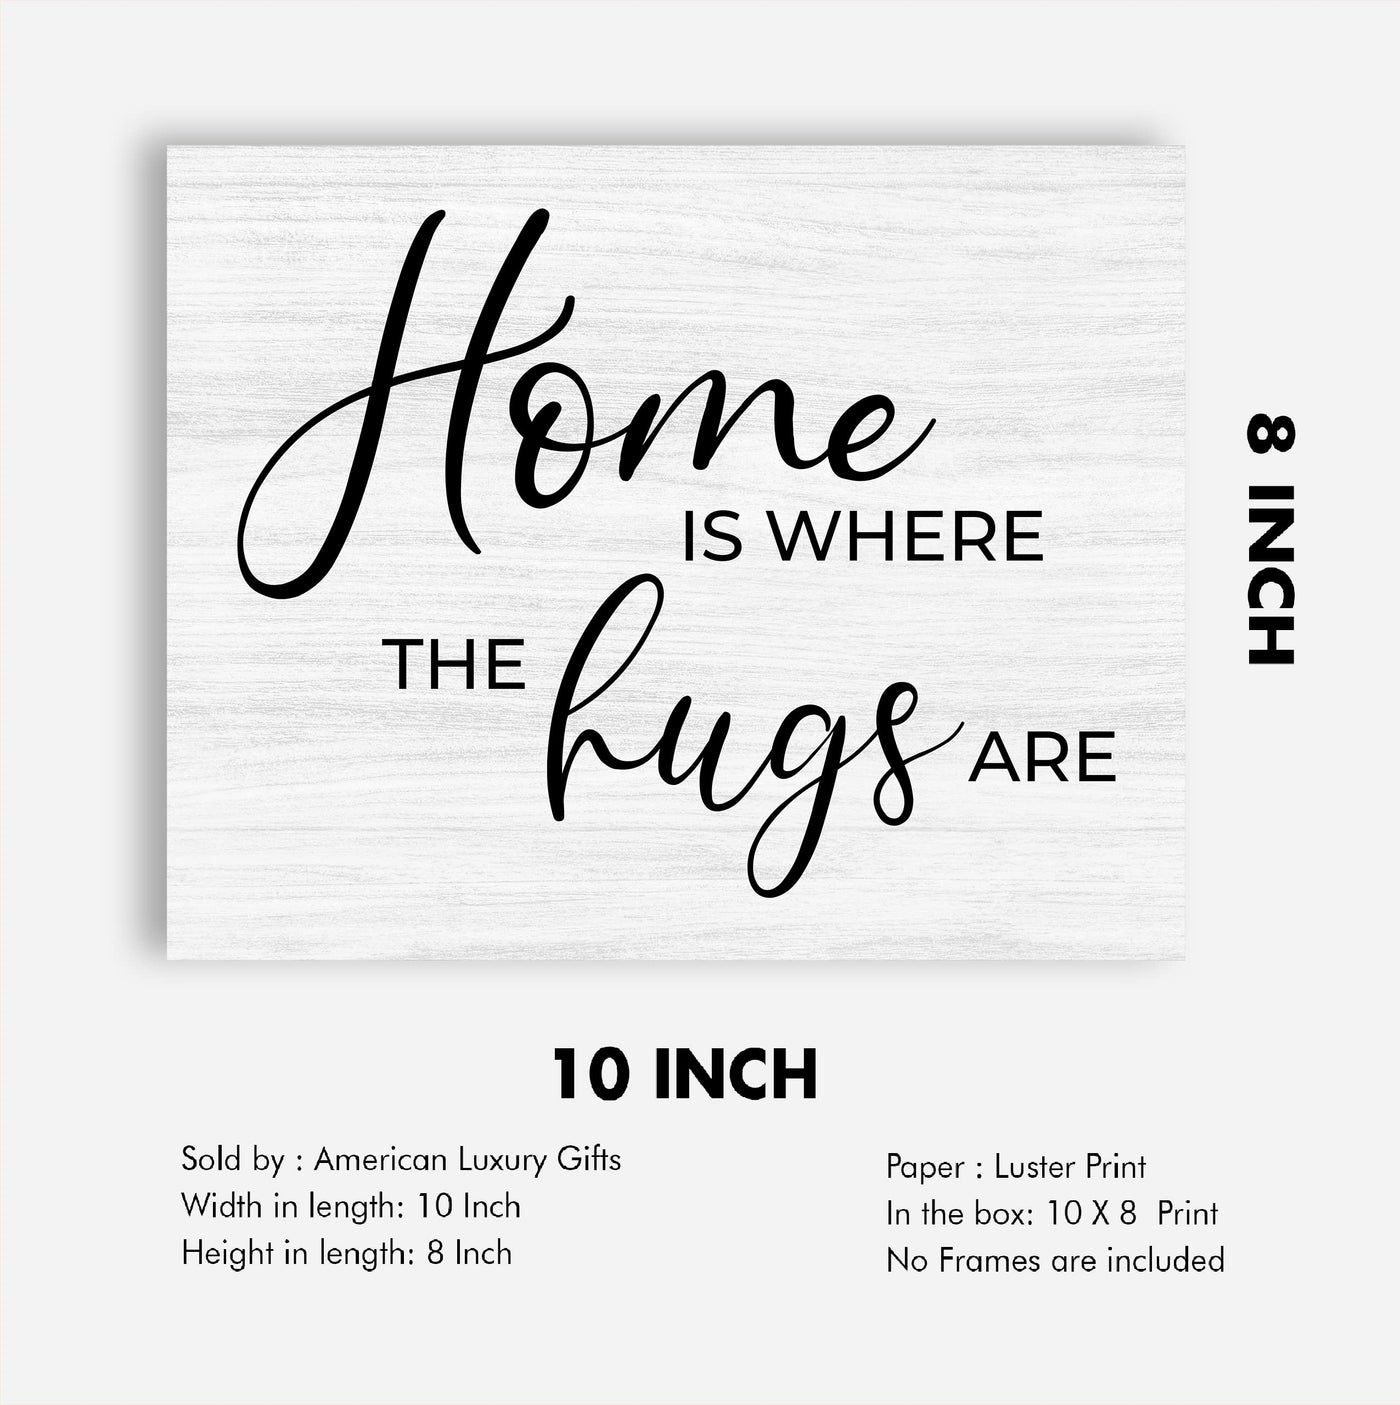 Home Is Where the Hugs Are- Inspirational Welcome Sign Wall Art -10 x 8" Decorative Farmhouse Print -Ready to Frame. Rustic House Decor for Home-Office-Entry-Family Room. Great Housewarming Gift!